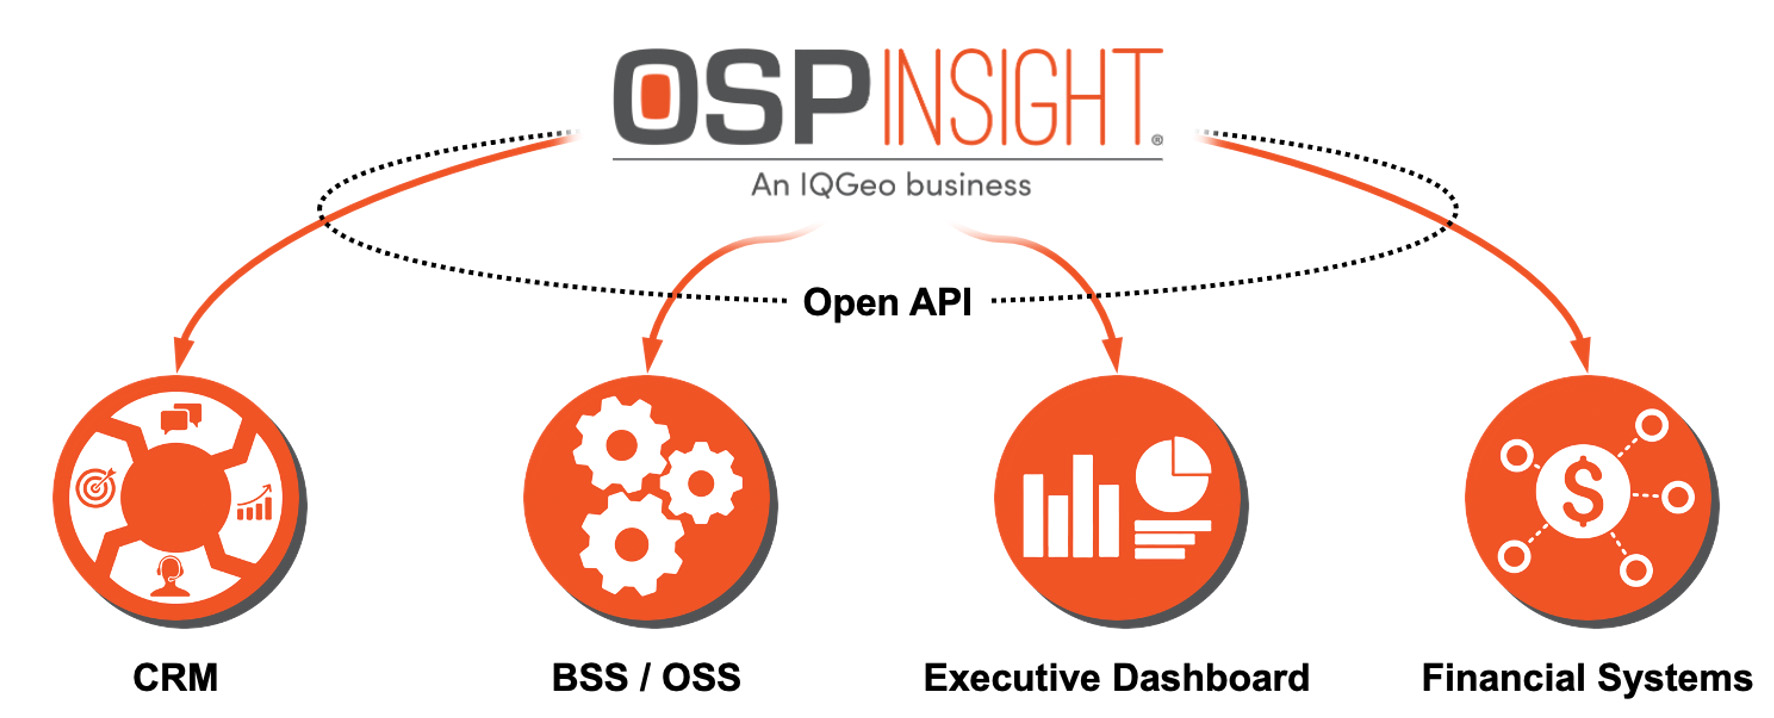 OSPi_OSPInsight Add-Ons_Open API (02)